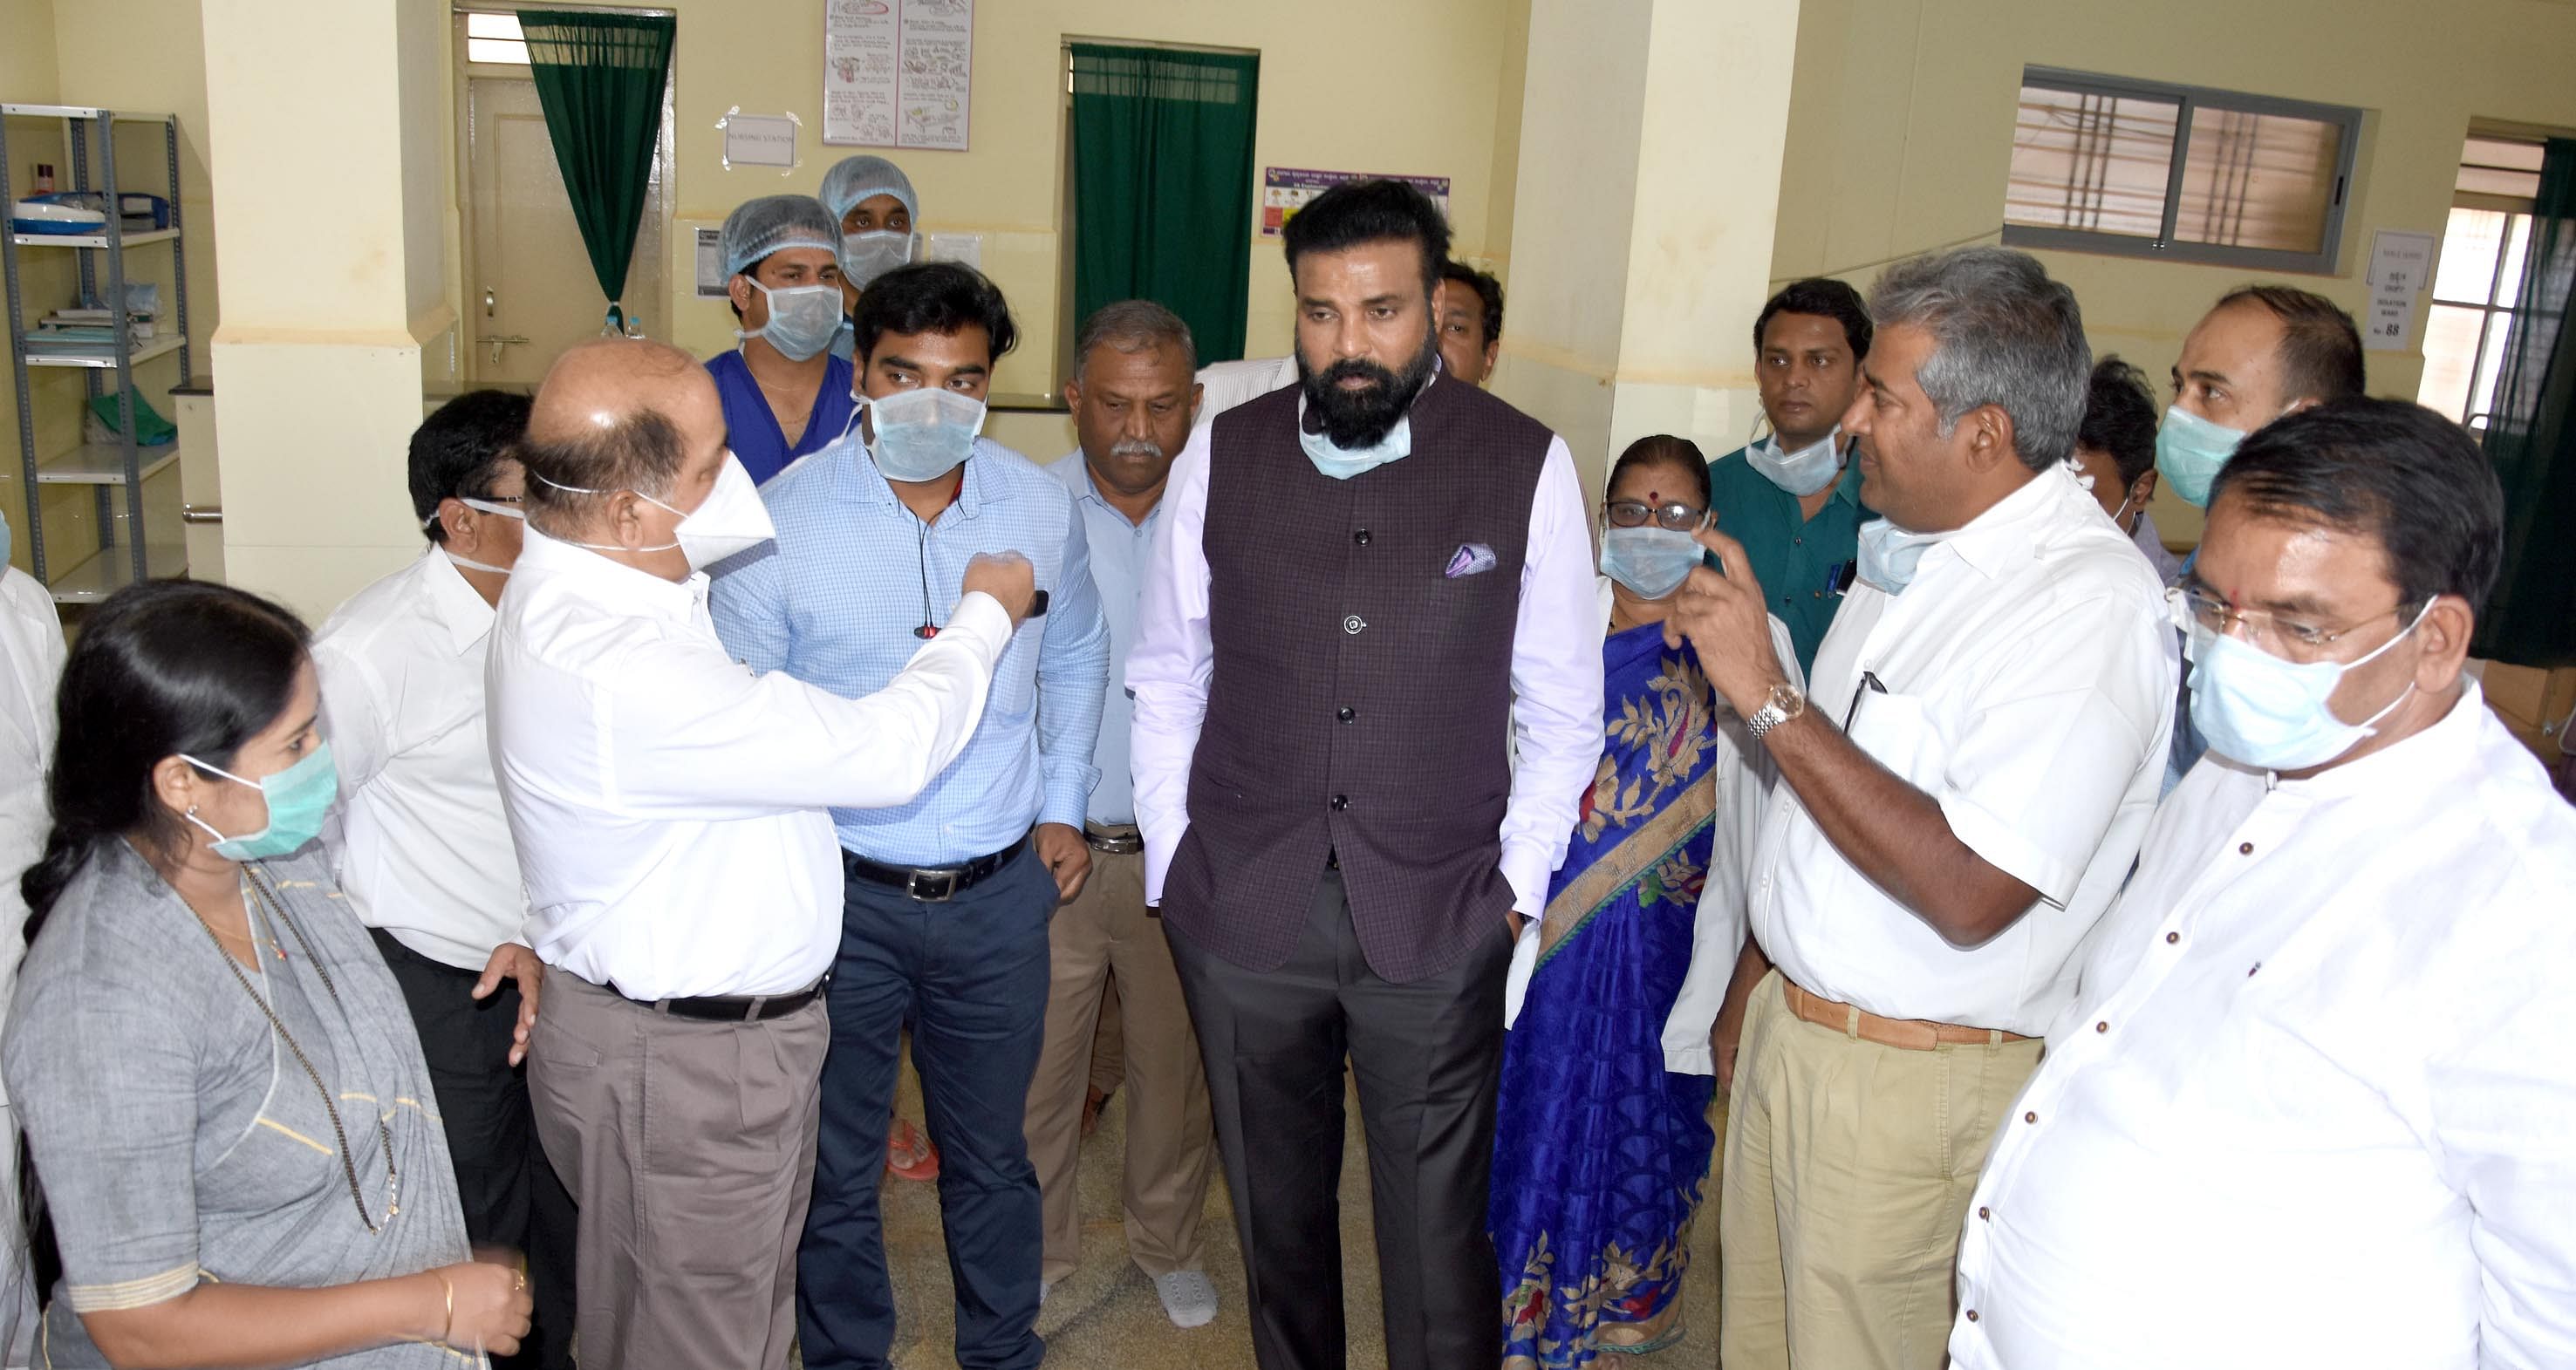 Health Minister B Sriramulu inspecting the facilities at the District Hospital in Belagavi. (DH Photo)